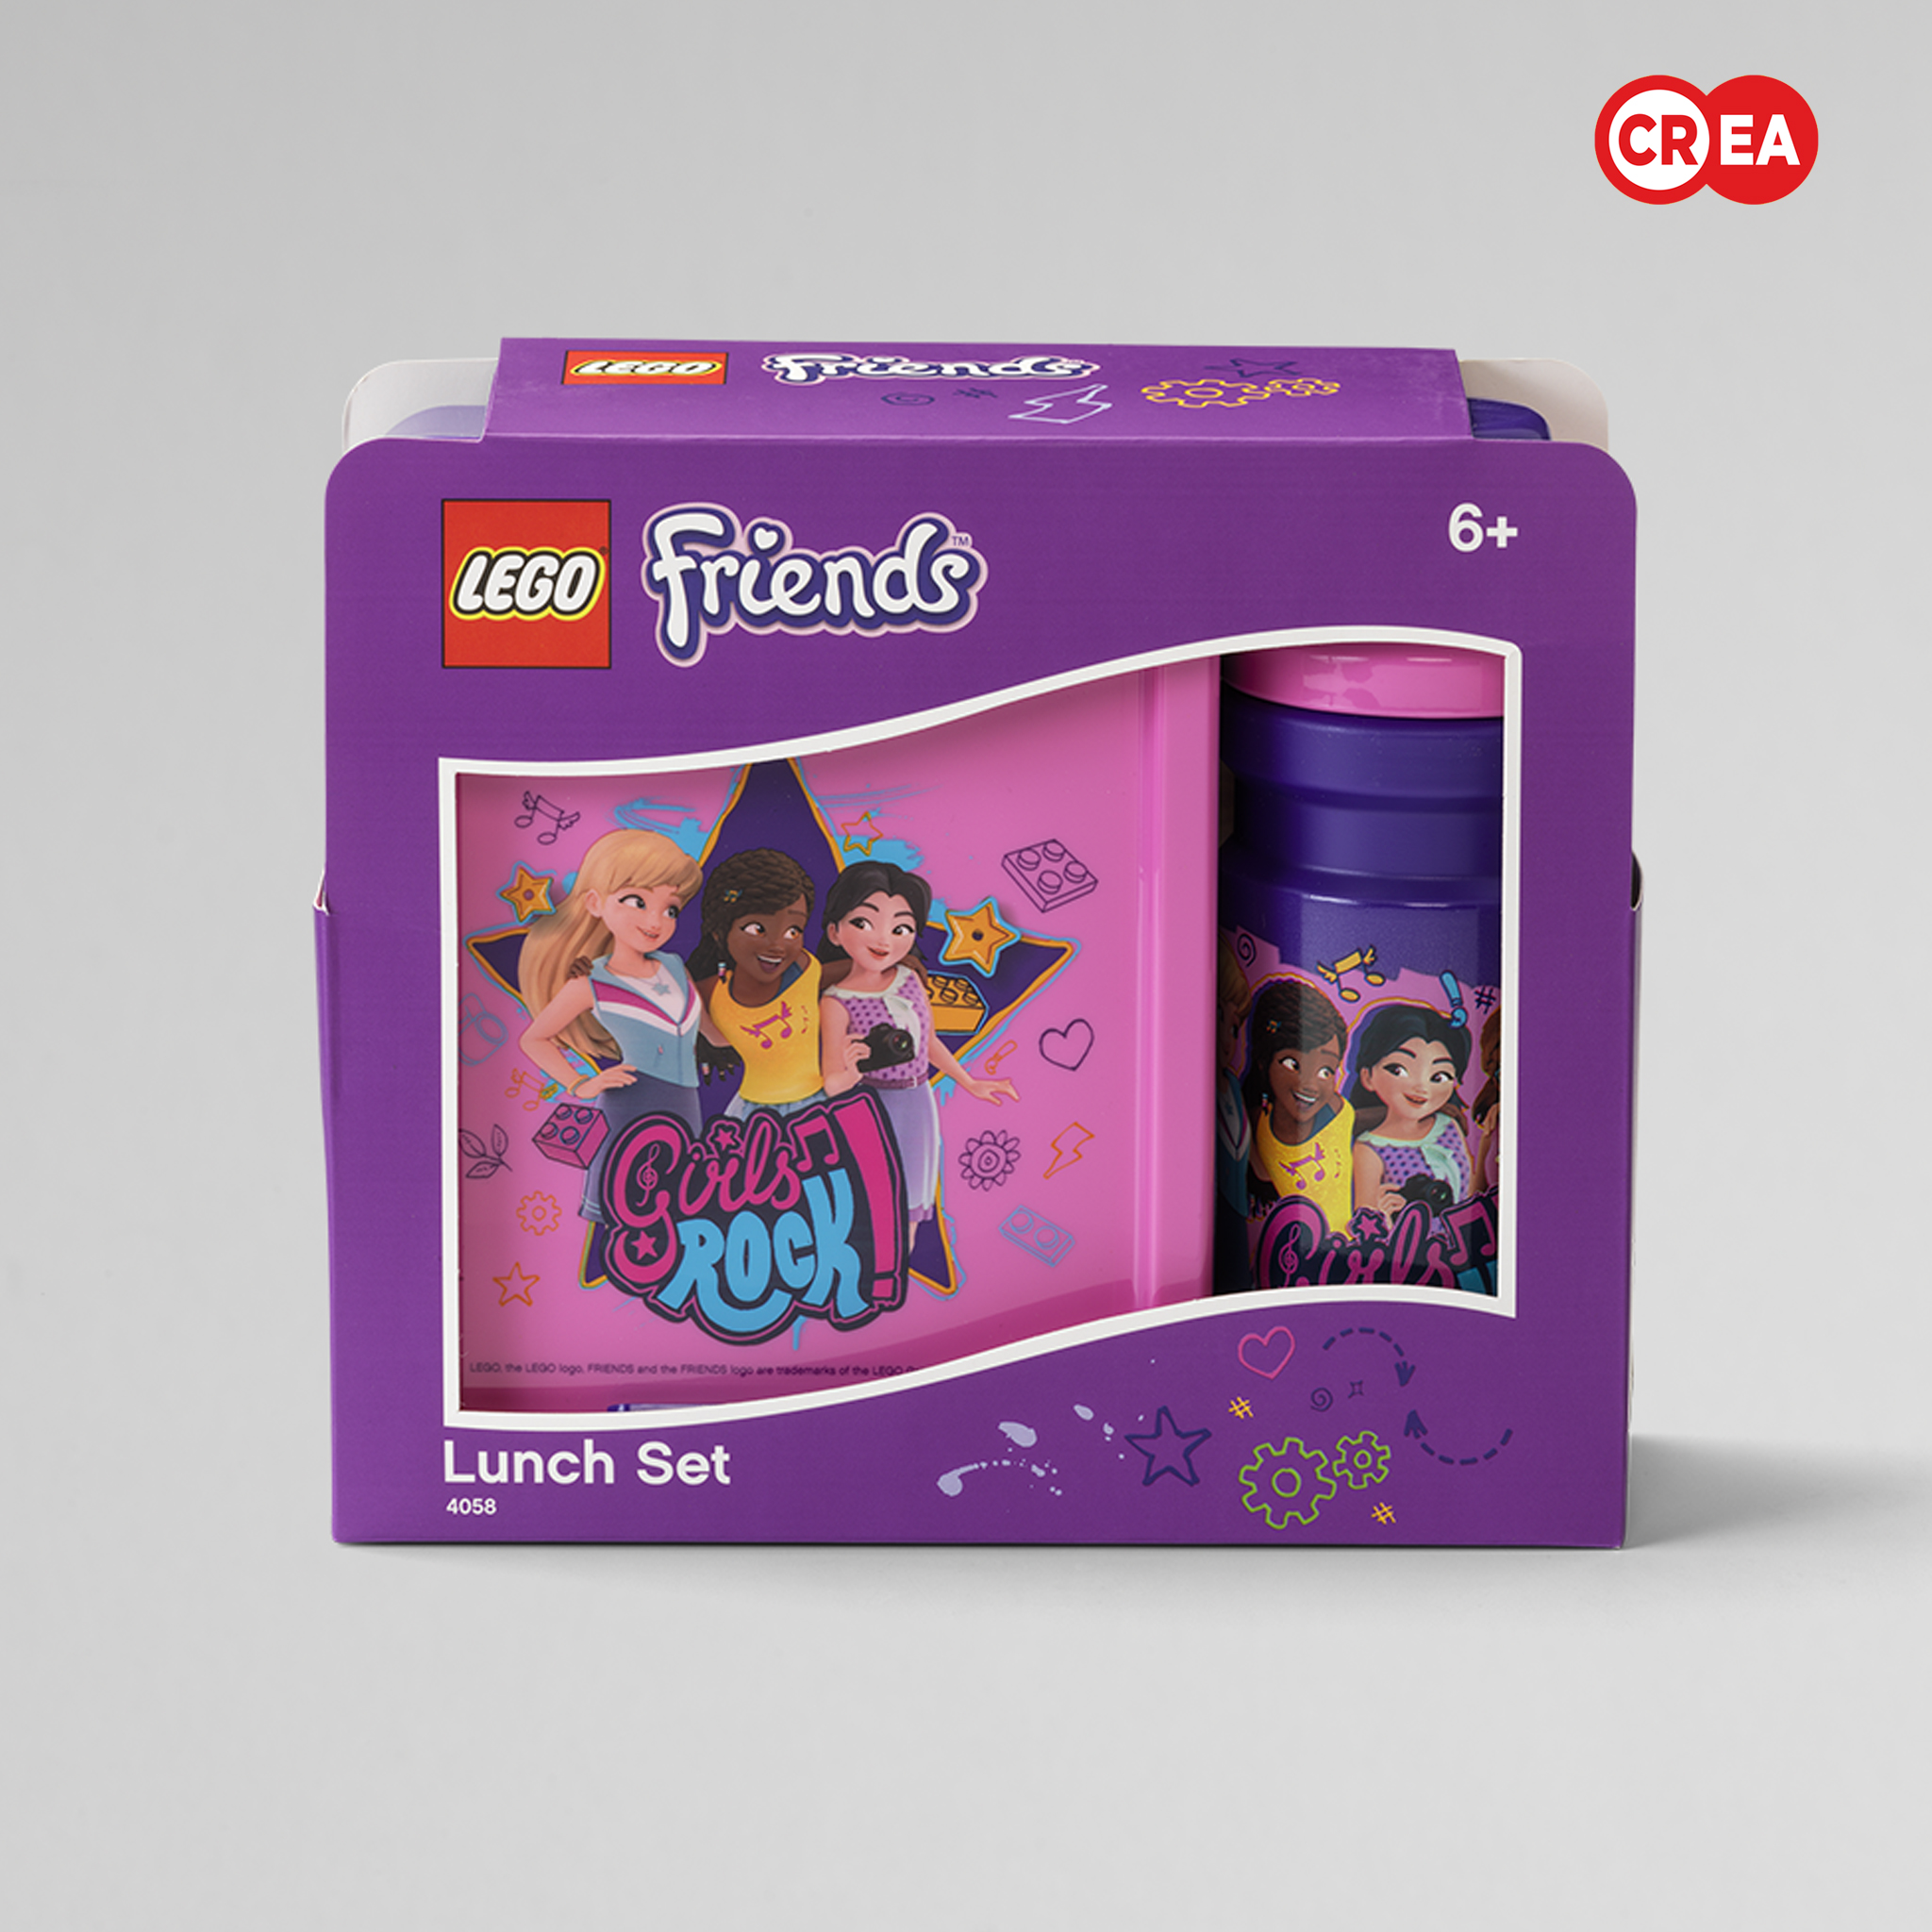 LEGO - Lunch KIT Iconic FRIENDS